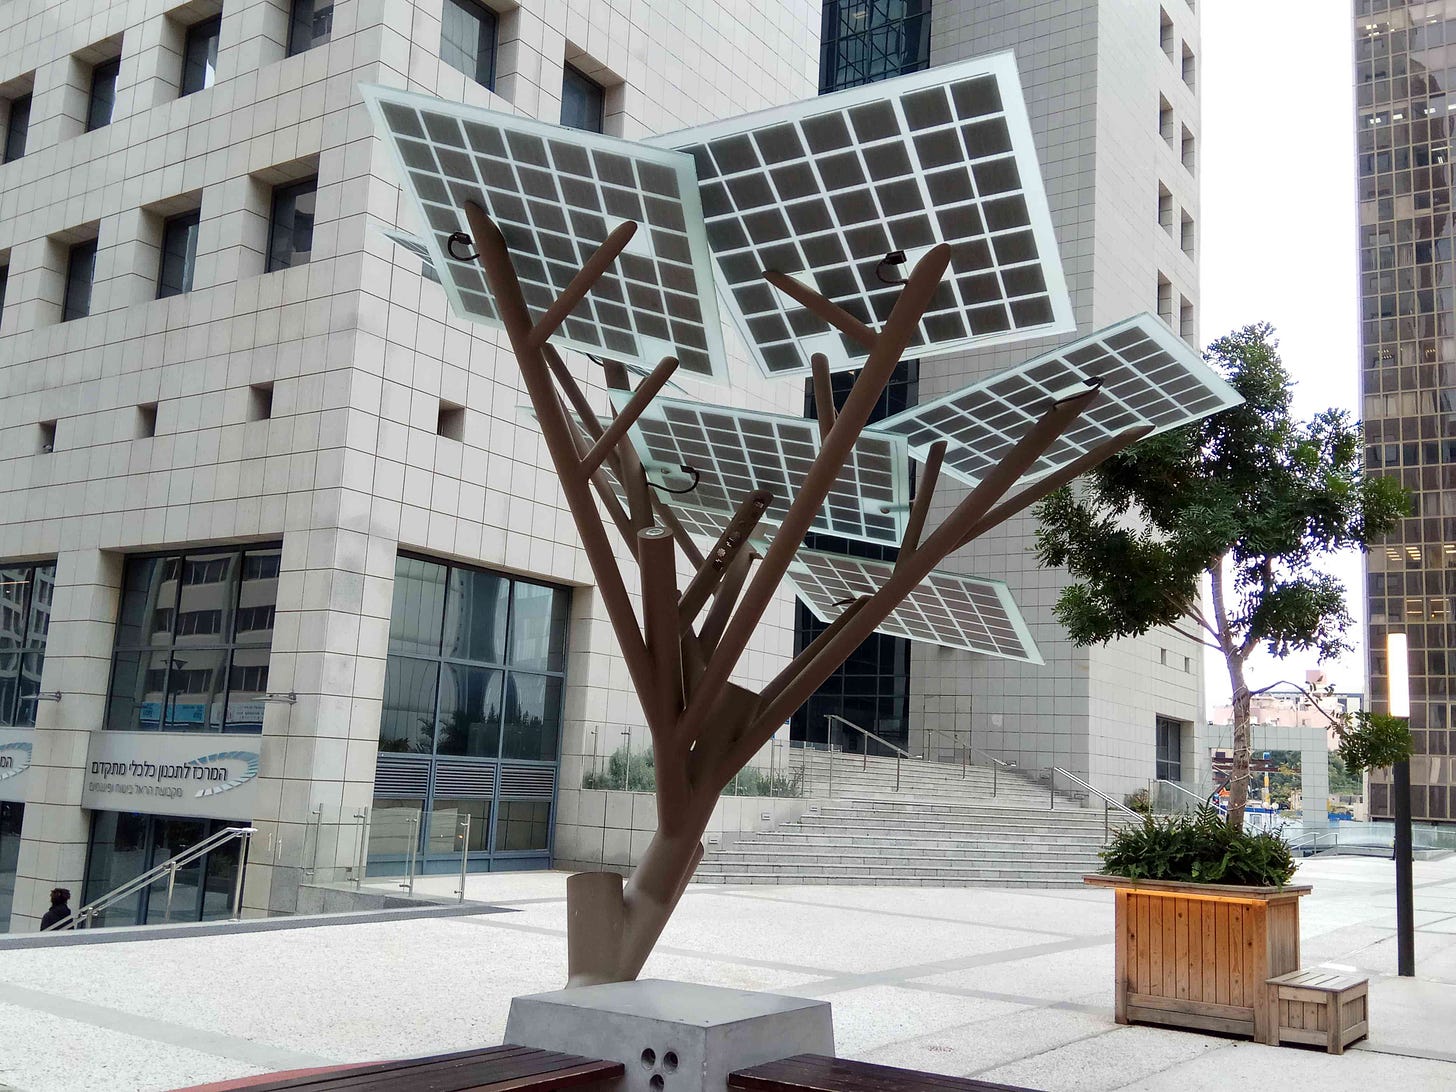 A solar tree in Ramat Gan has square solar panels extending from branches that connect to a central trunk.